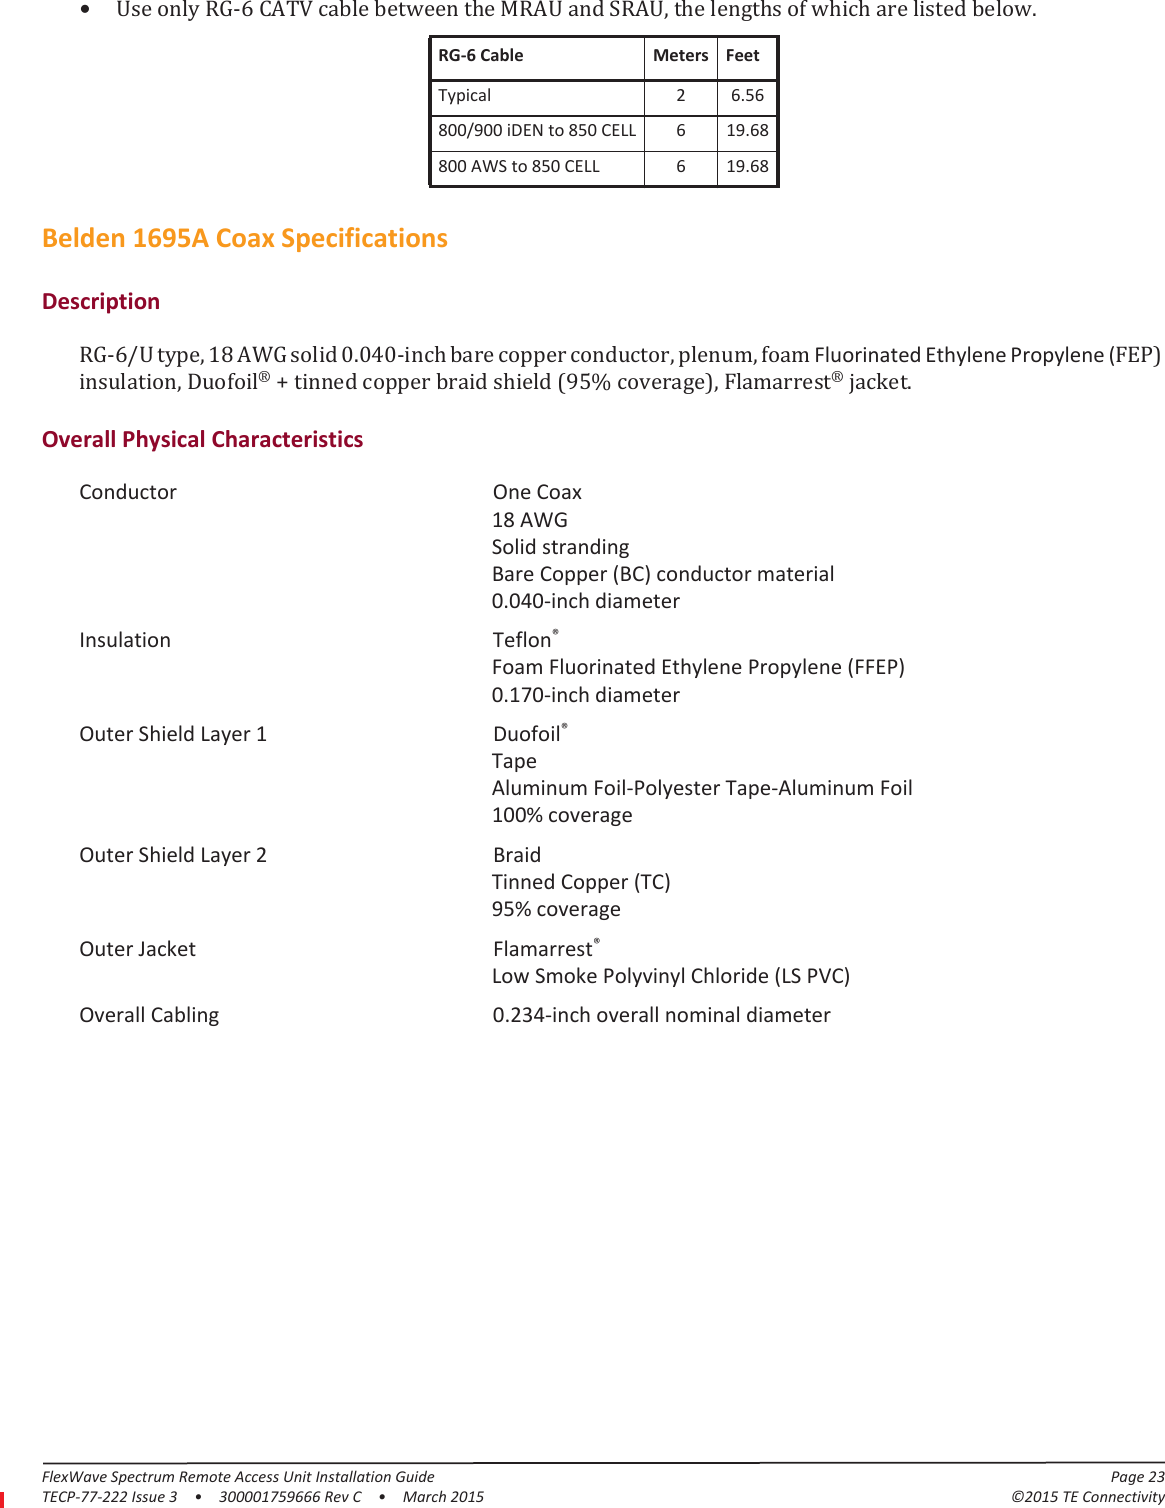 FlexWave Spectrum Remote Access Unit Installation Guide Page 23TECP-77-222 Issue 3  •  300001759666 Rev C  •  March 2015 ©2015 TE Connectivity•Use only RG-6 CATV cable between the MRAU and SRAU, the lengths of which are listed below.RG-6 Cable Meters FeetTypical 2 6.56800/900 iDEN to 850 CELL 6 19.68800 AWS to 850 CELL 6 19.68Belden 1695A Coax SpecificationsDescriptionRG-6/U type, 18 AWG solid 0.040-inch bare copper conductor, plenum, foam Fluorinated Ethylene Propylene (FEP) insulation, Duofoil® + tinned copper braid shield (95% coverage), Flamarrest® jacket.Overall Physical CharacteristicsConductor One Coax 18 AWG Solid stranding Bare Copper (BC) conductor material 0.040-inch diameterInsulation Teflon® Foam Fluorinated Ethylene Propylene (FFEP) 0.170-inch diameterOuter Shield Layer 1 Duofoil® Tape Aluminum Foil-Polyester Tape-Aluminum Foil 100% coverageOuter Shield Layer 2 Braid Tinned Copper (TC) 95% coverageOuter Jacket Flamarrest® Low Smoke Polyvinyl Chloride (LS PVC)Overall Cabling 0.234-inch overall nominal diameter